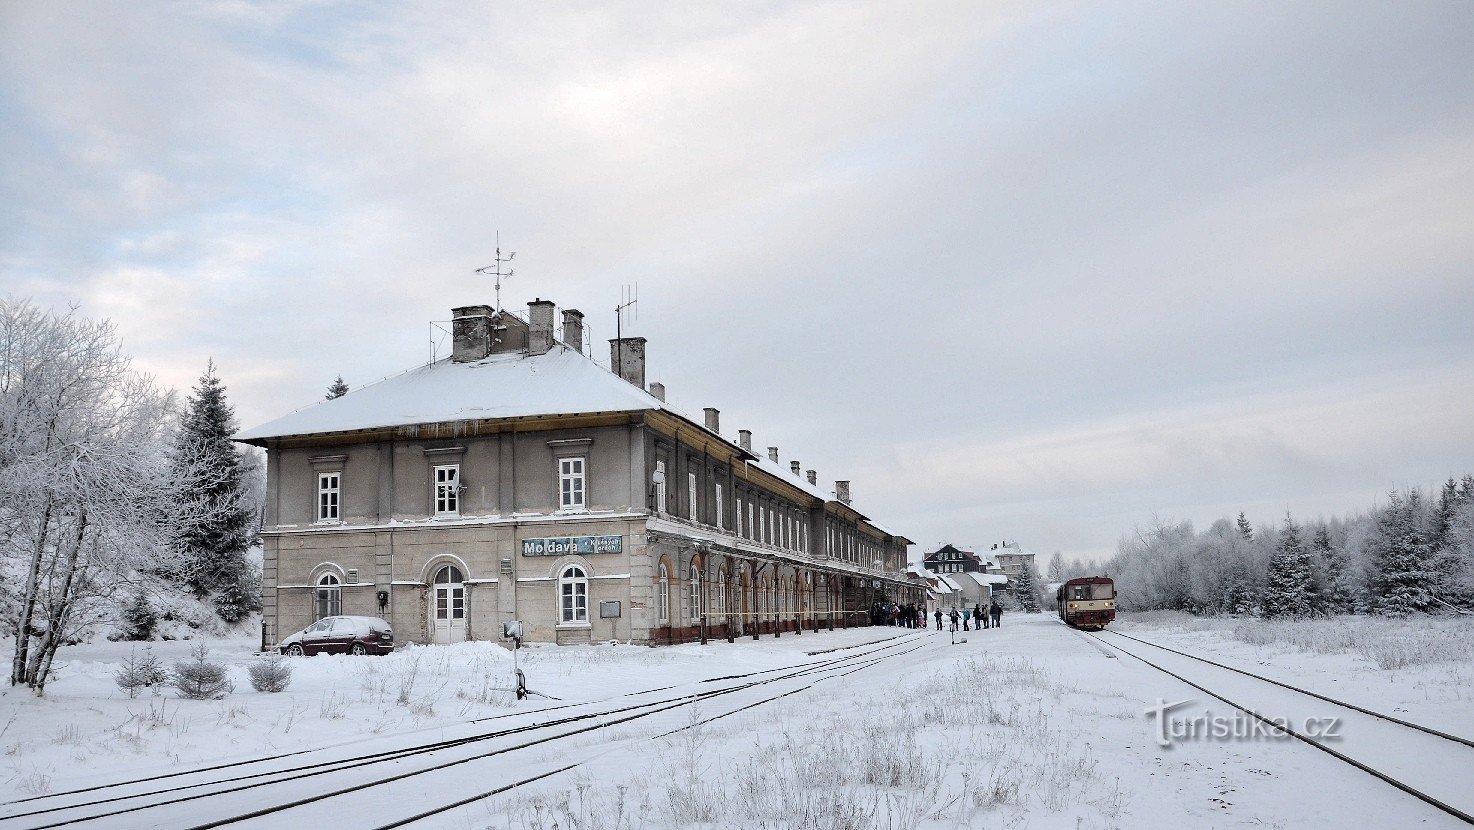 Moldava railway station in the Ore Mountains